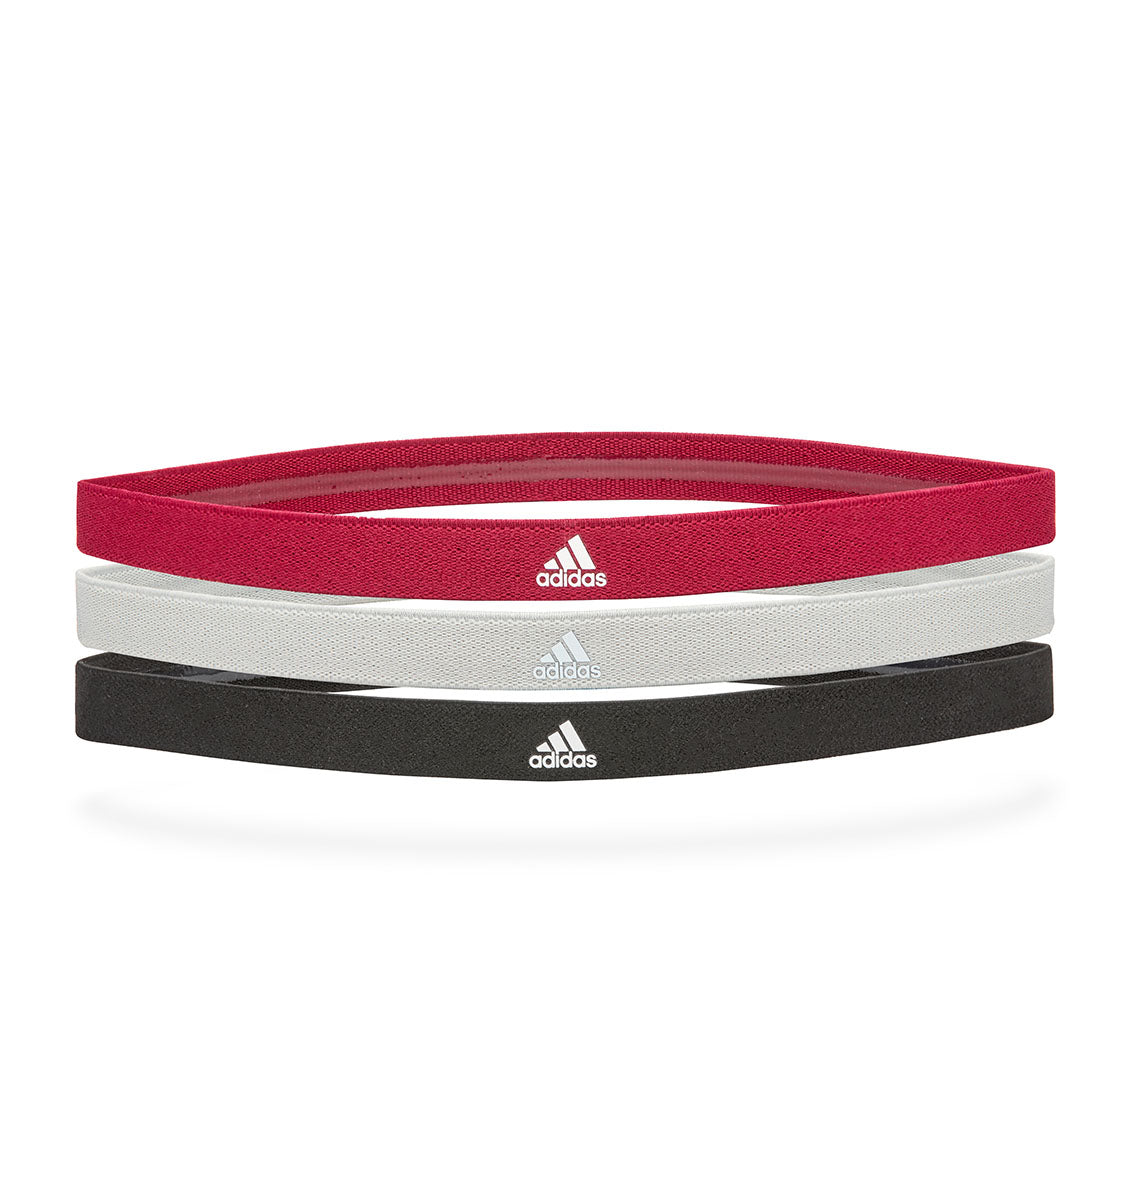 adidas Sports Hair Bands - Black/Grey/Powerberry (3 Pack) - 1